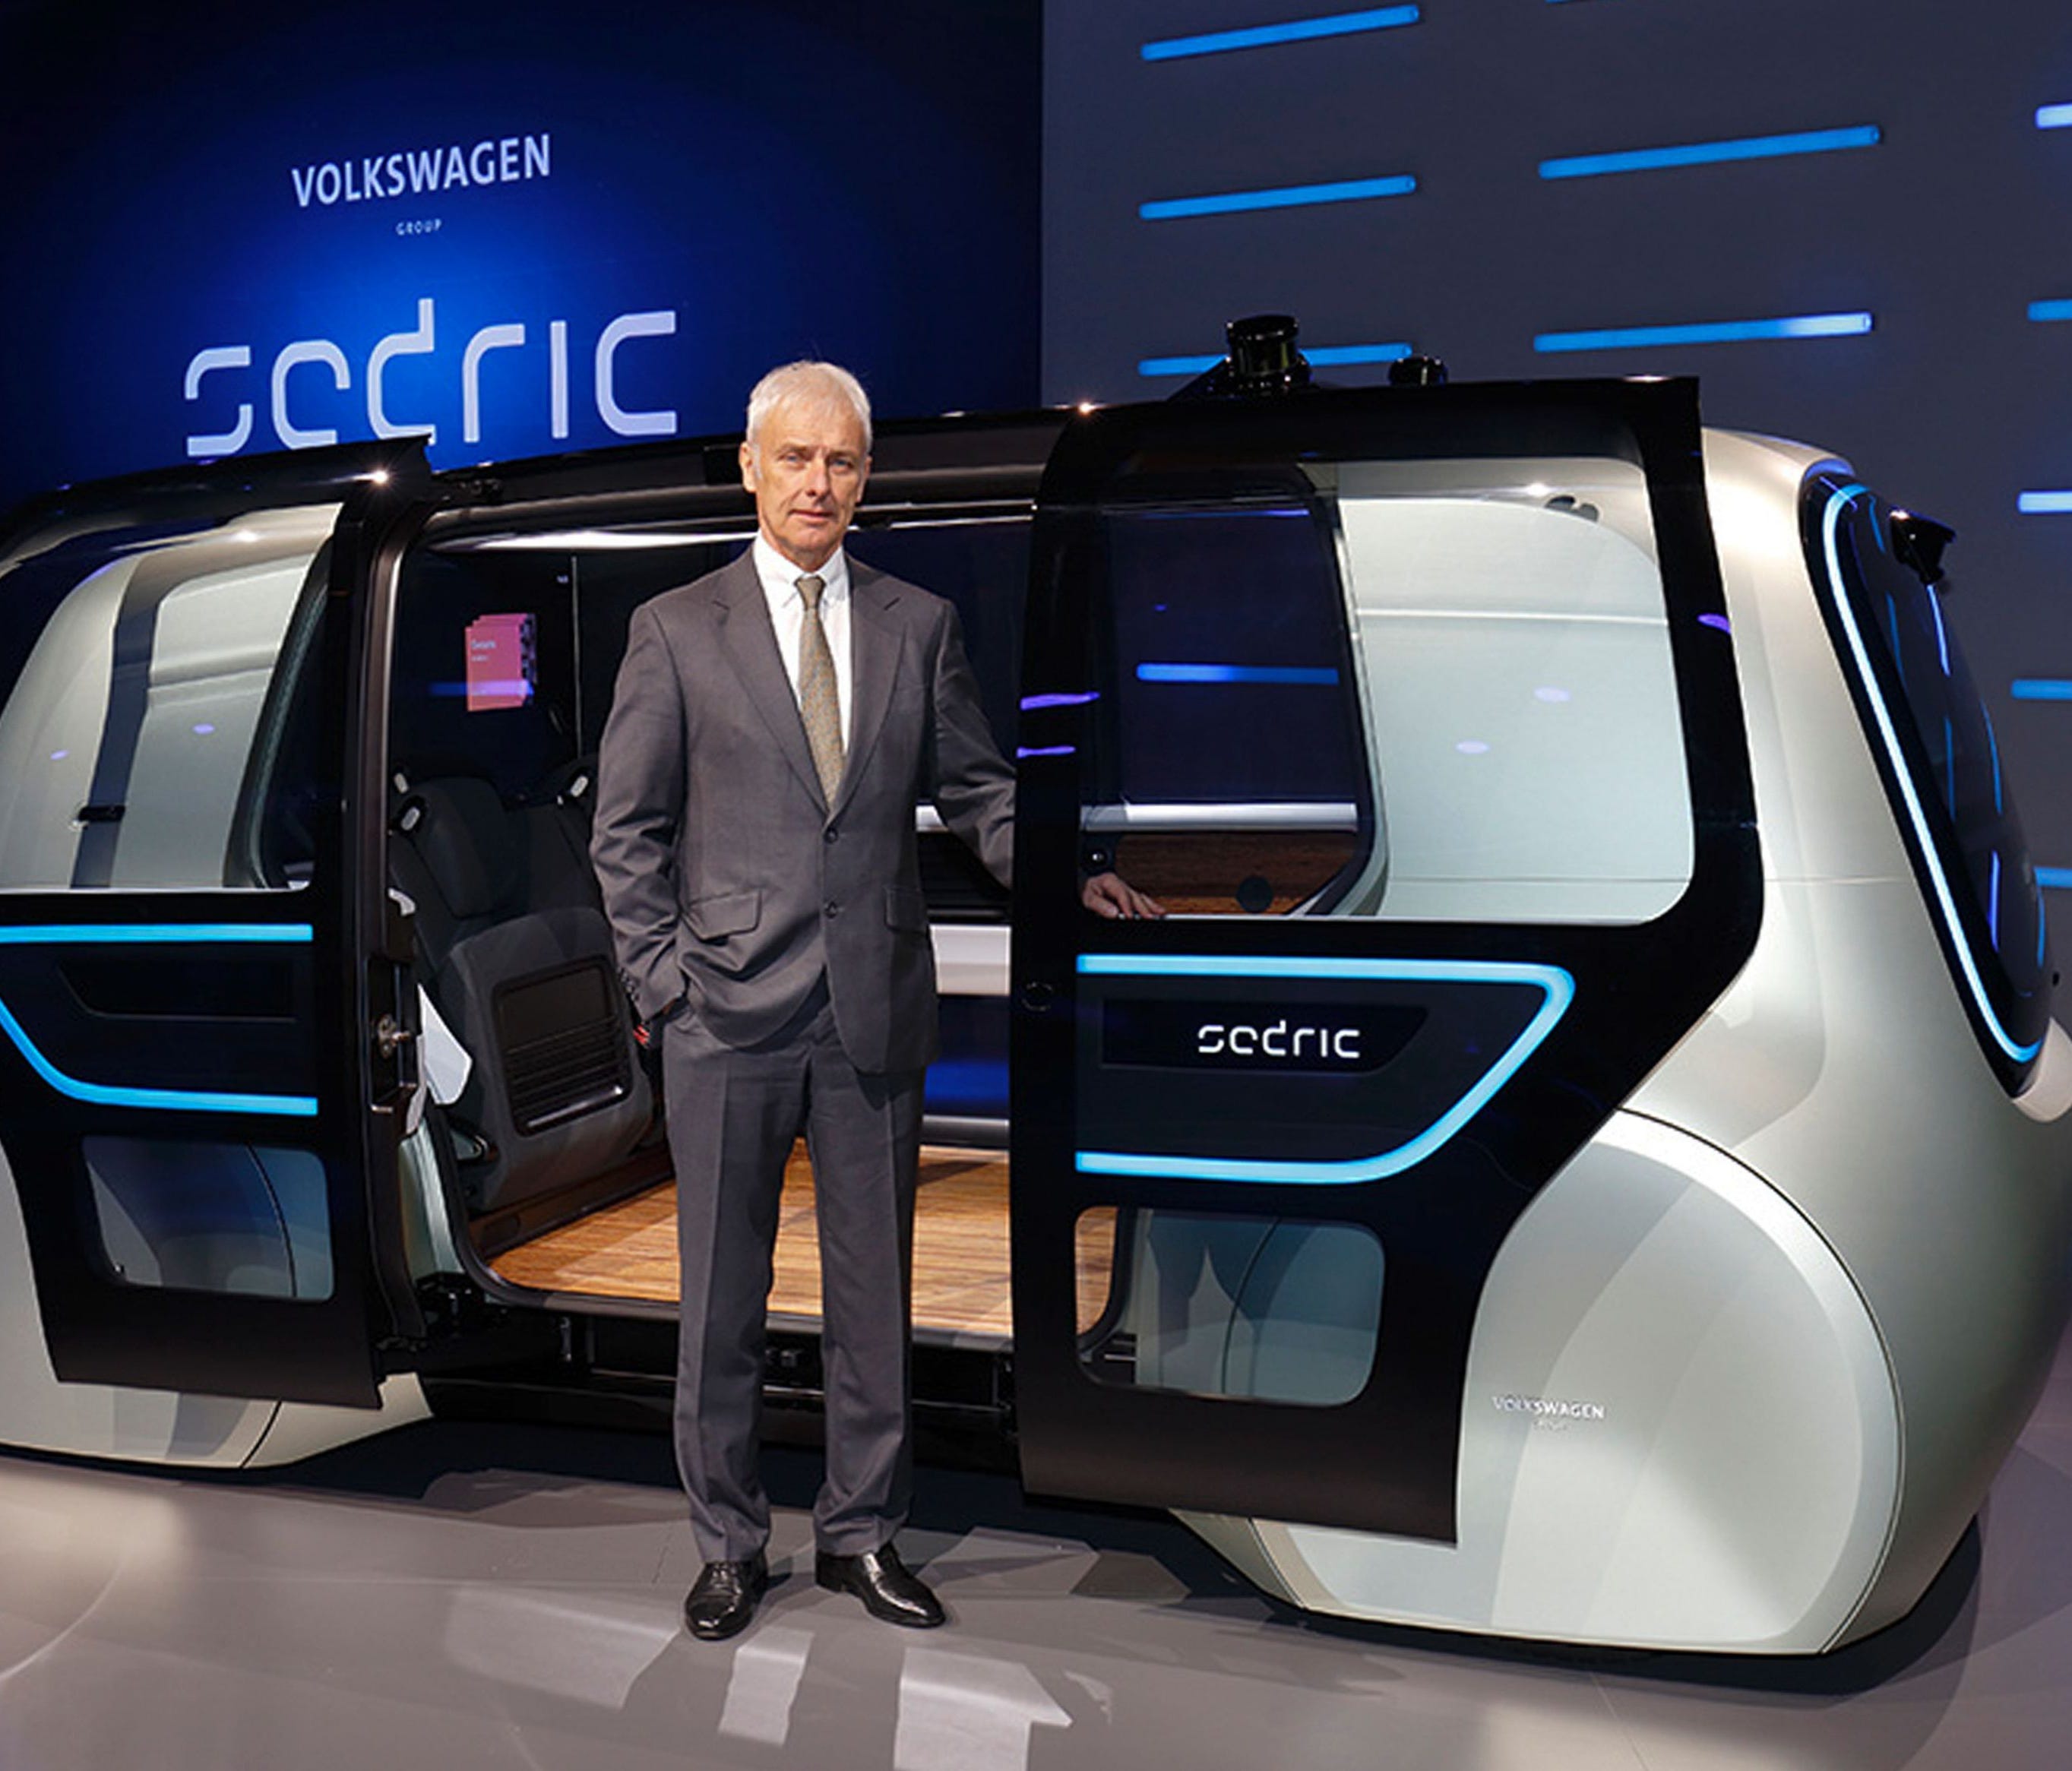 Volkswagen Group CEO Matthias Mueller posing with Sedric, the group's first autonomous car prototype